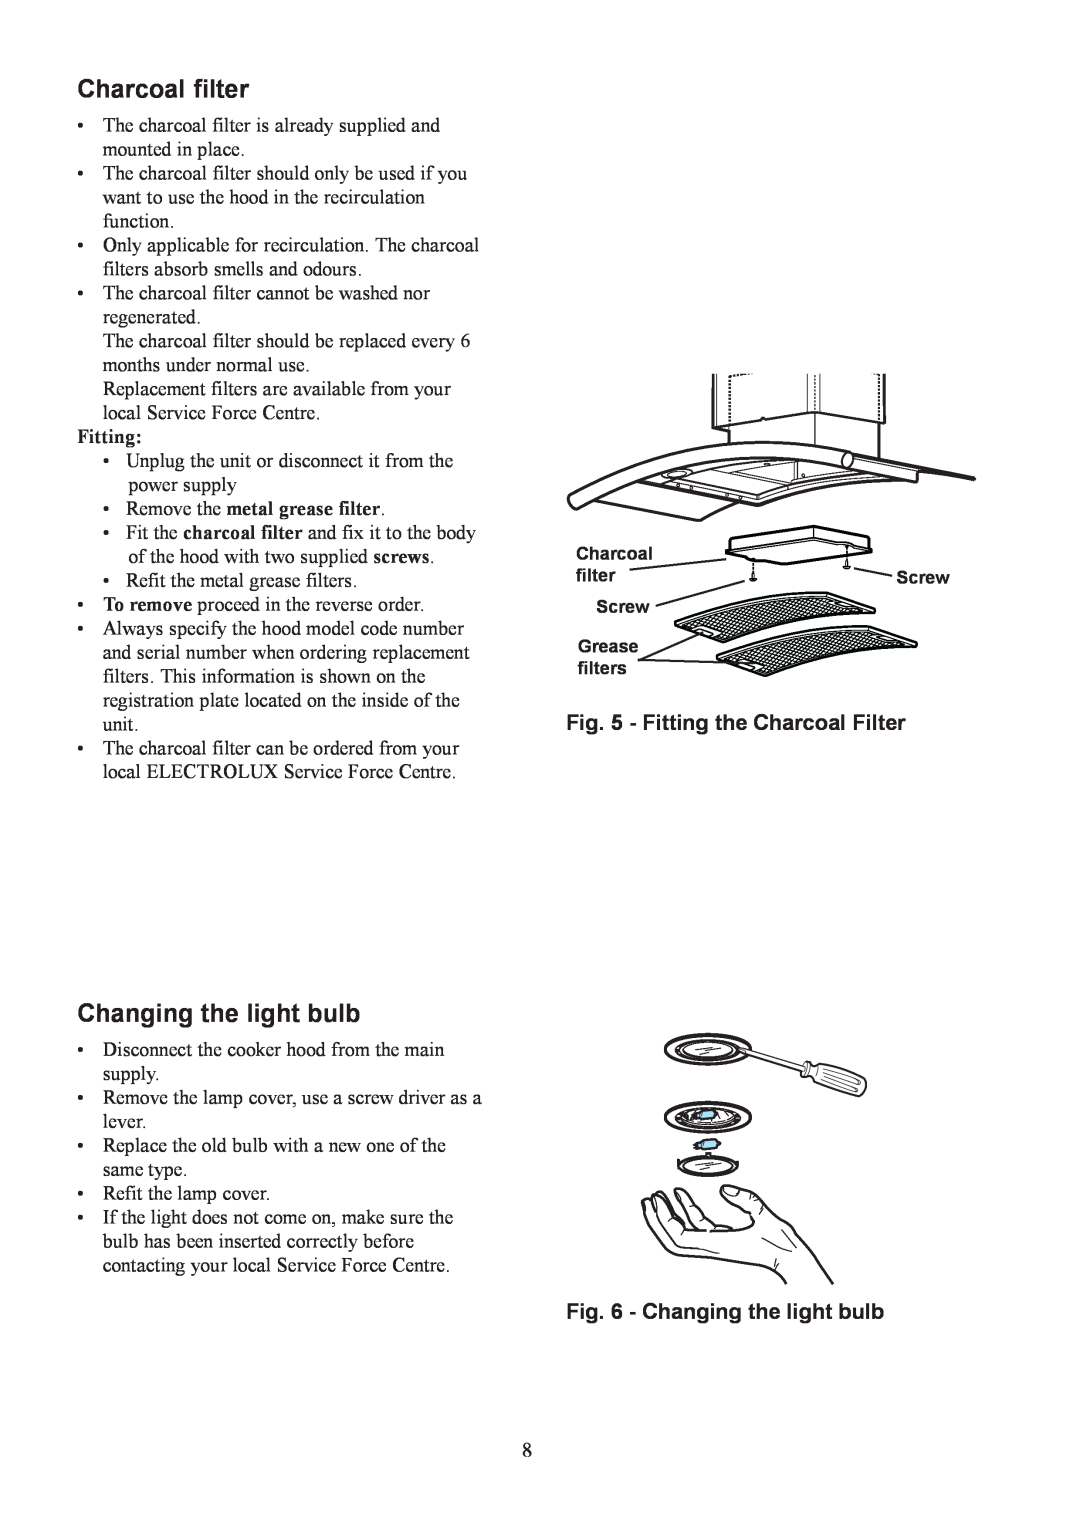 Electrolux CH 700 user manual Charcoal filter, Changing the light bulb, Fitting the Charcoal Filter 